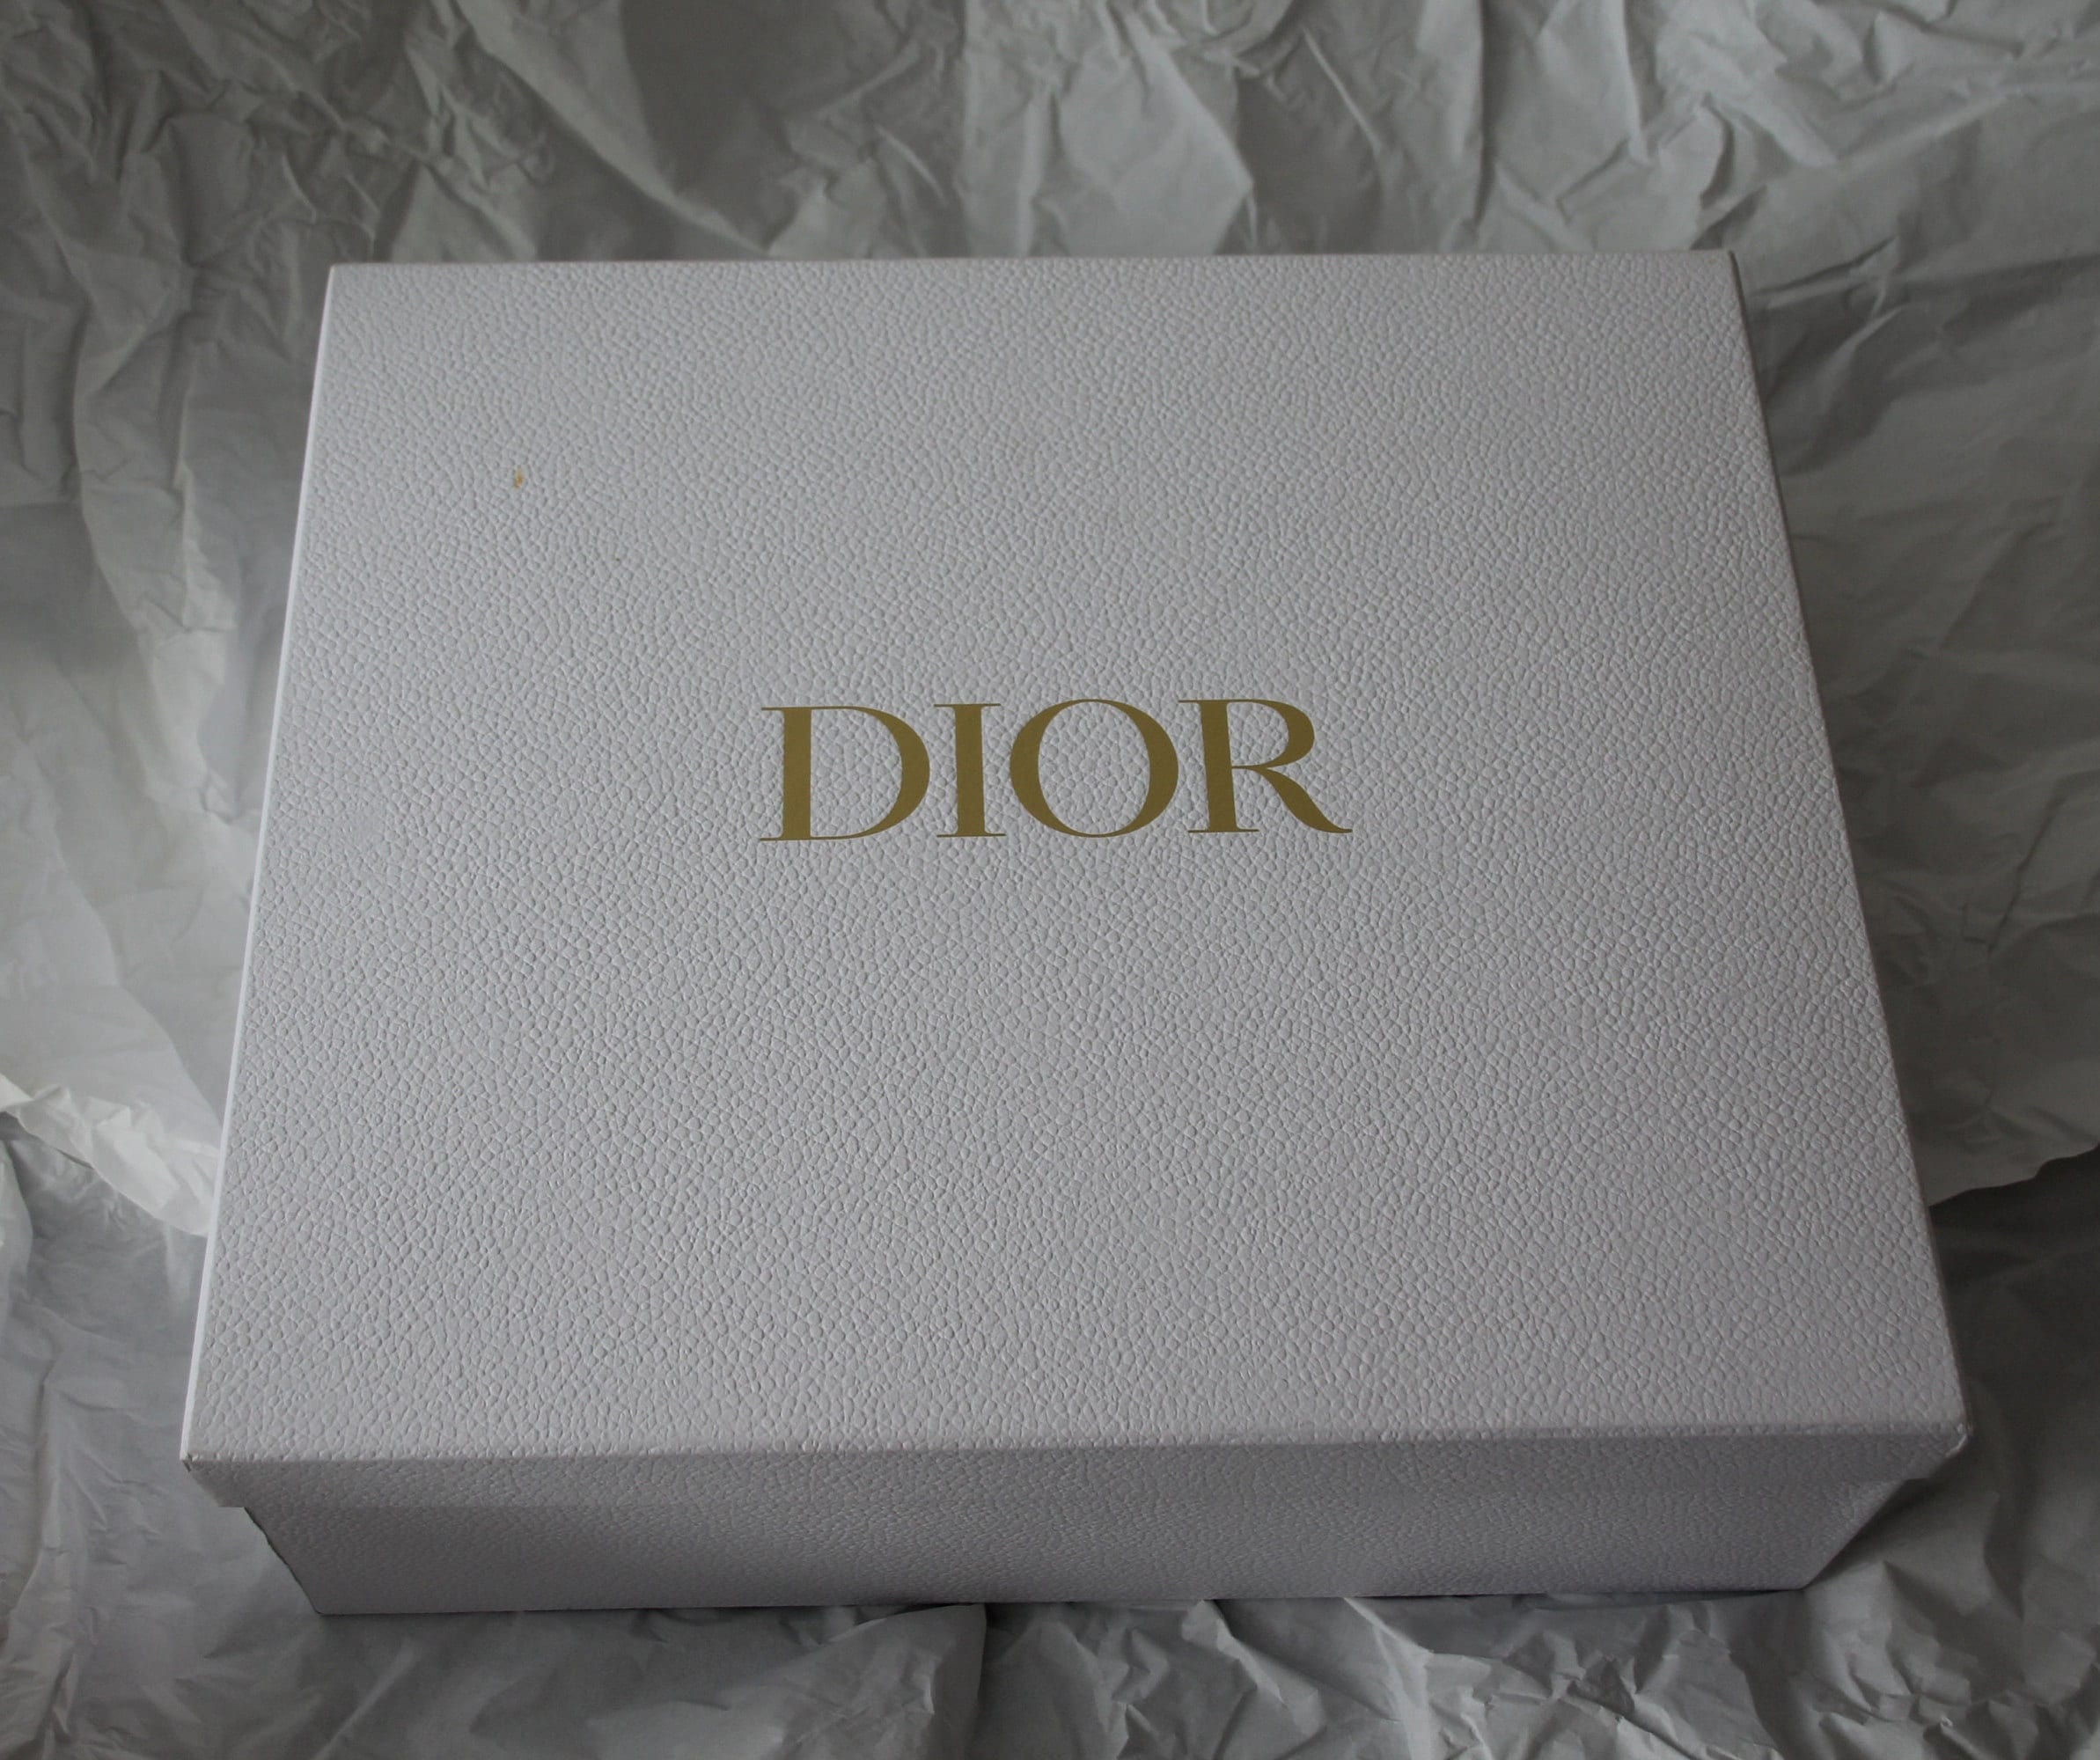 Dior, Tablets & Accessories, Christian Dior Garment Bag Cover Case Long  560 Length